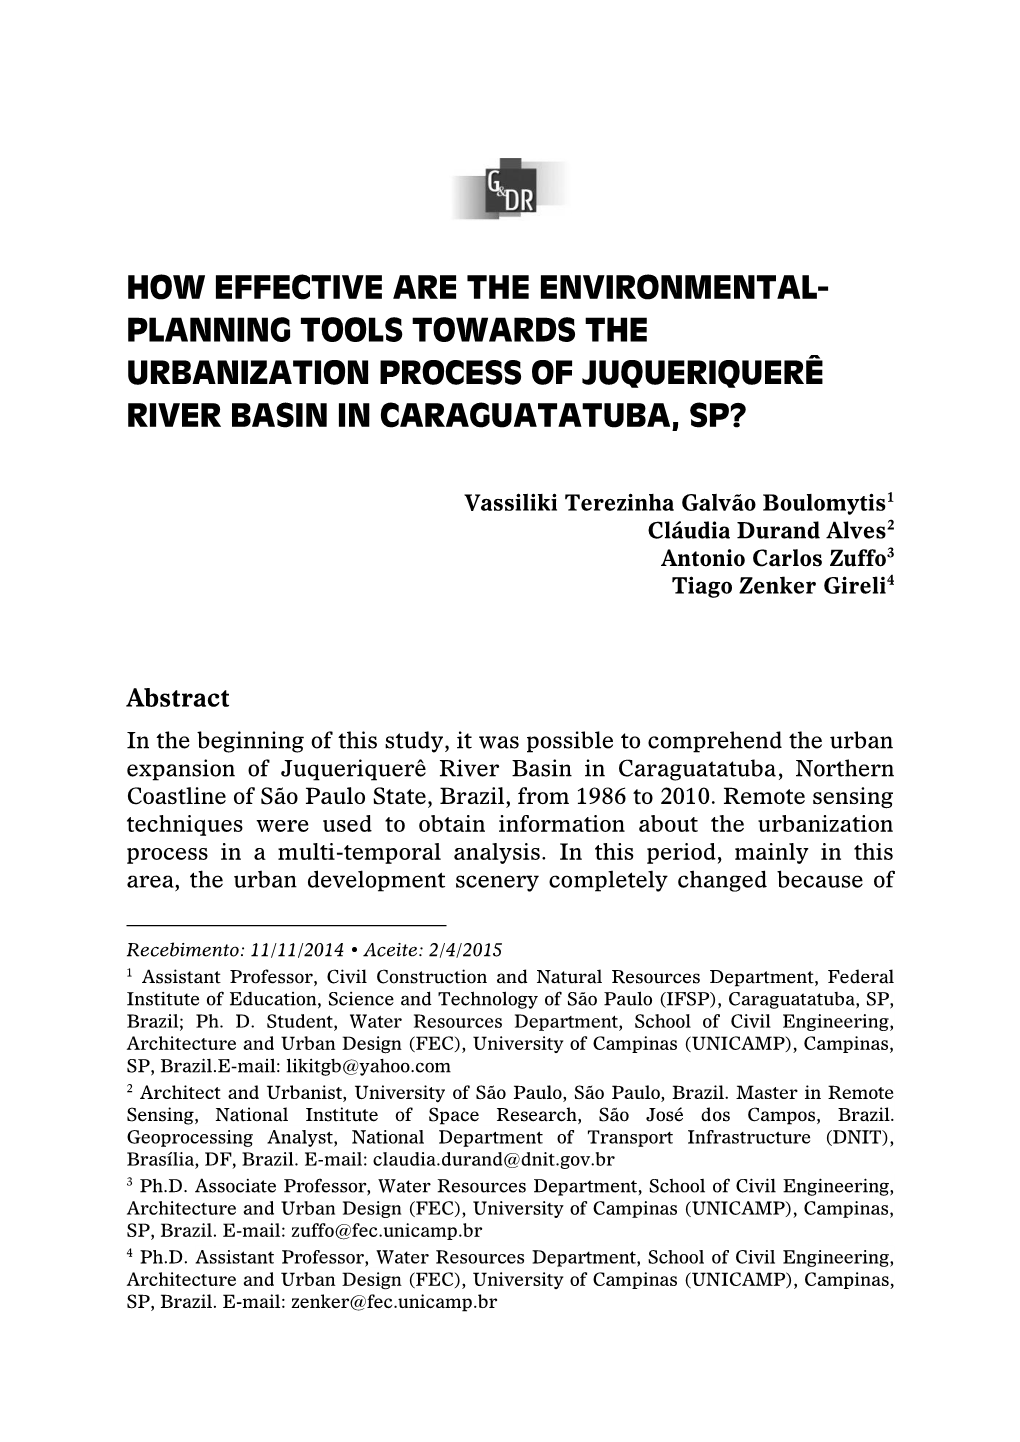 How Effective Are the Environmental- Planning Tools Towards the Urbanization Process of Juqueriquerê River Basin in Caraguatatuba, Sp?